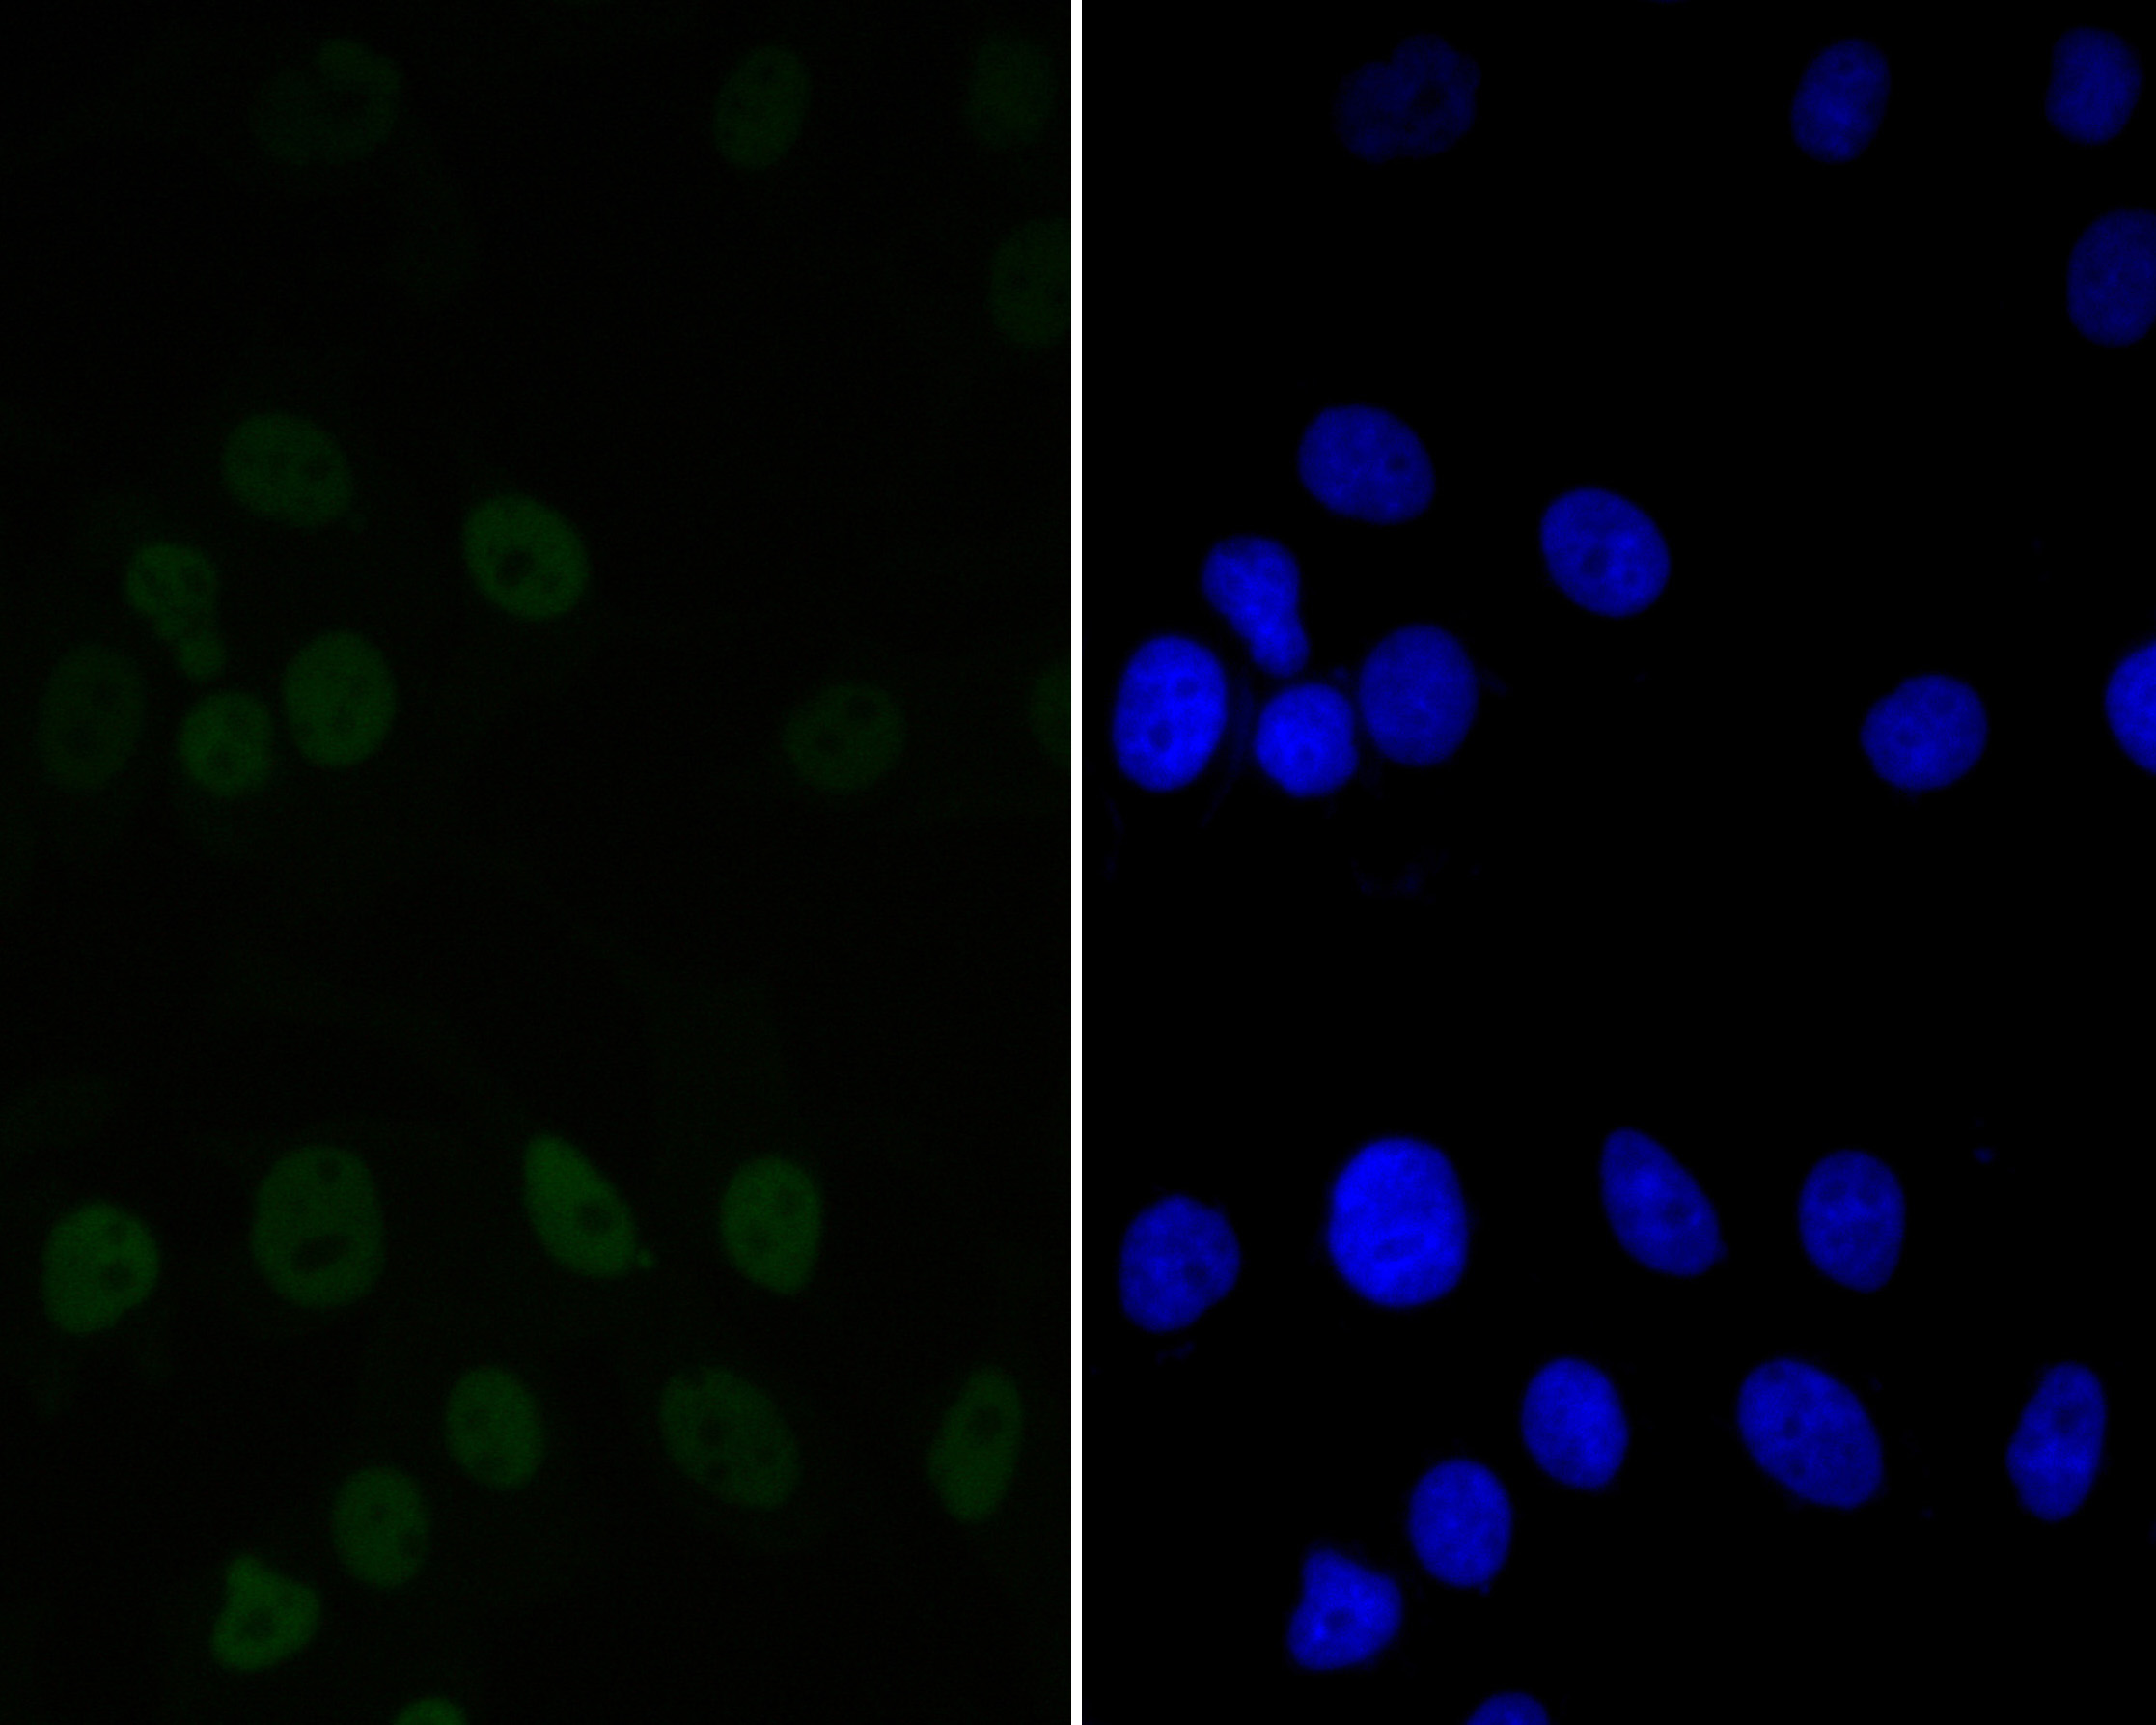 ICC staining of CTBP2 in MCF-7 cells (green). Formalin fixed cells were permeabilized with 0.1% Triton X-100 in TBS for 10 minutes at room temperature and blocked with 1% Blocker BSA for 15 minutes at room temperature. Cells were probed with the primary antibody (ET7111-27, 1/50) for 1 hour at room temperature, washed with PBS. Alexa Fluor®488 Goat anti-Rabbit IgG was used as the secondary antibody at 1/1,000 dilution. The nuclear counter stain is DAPI (blue).